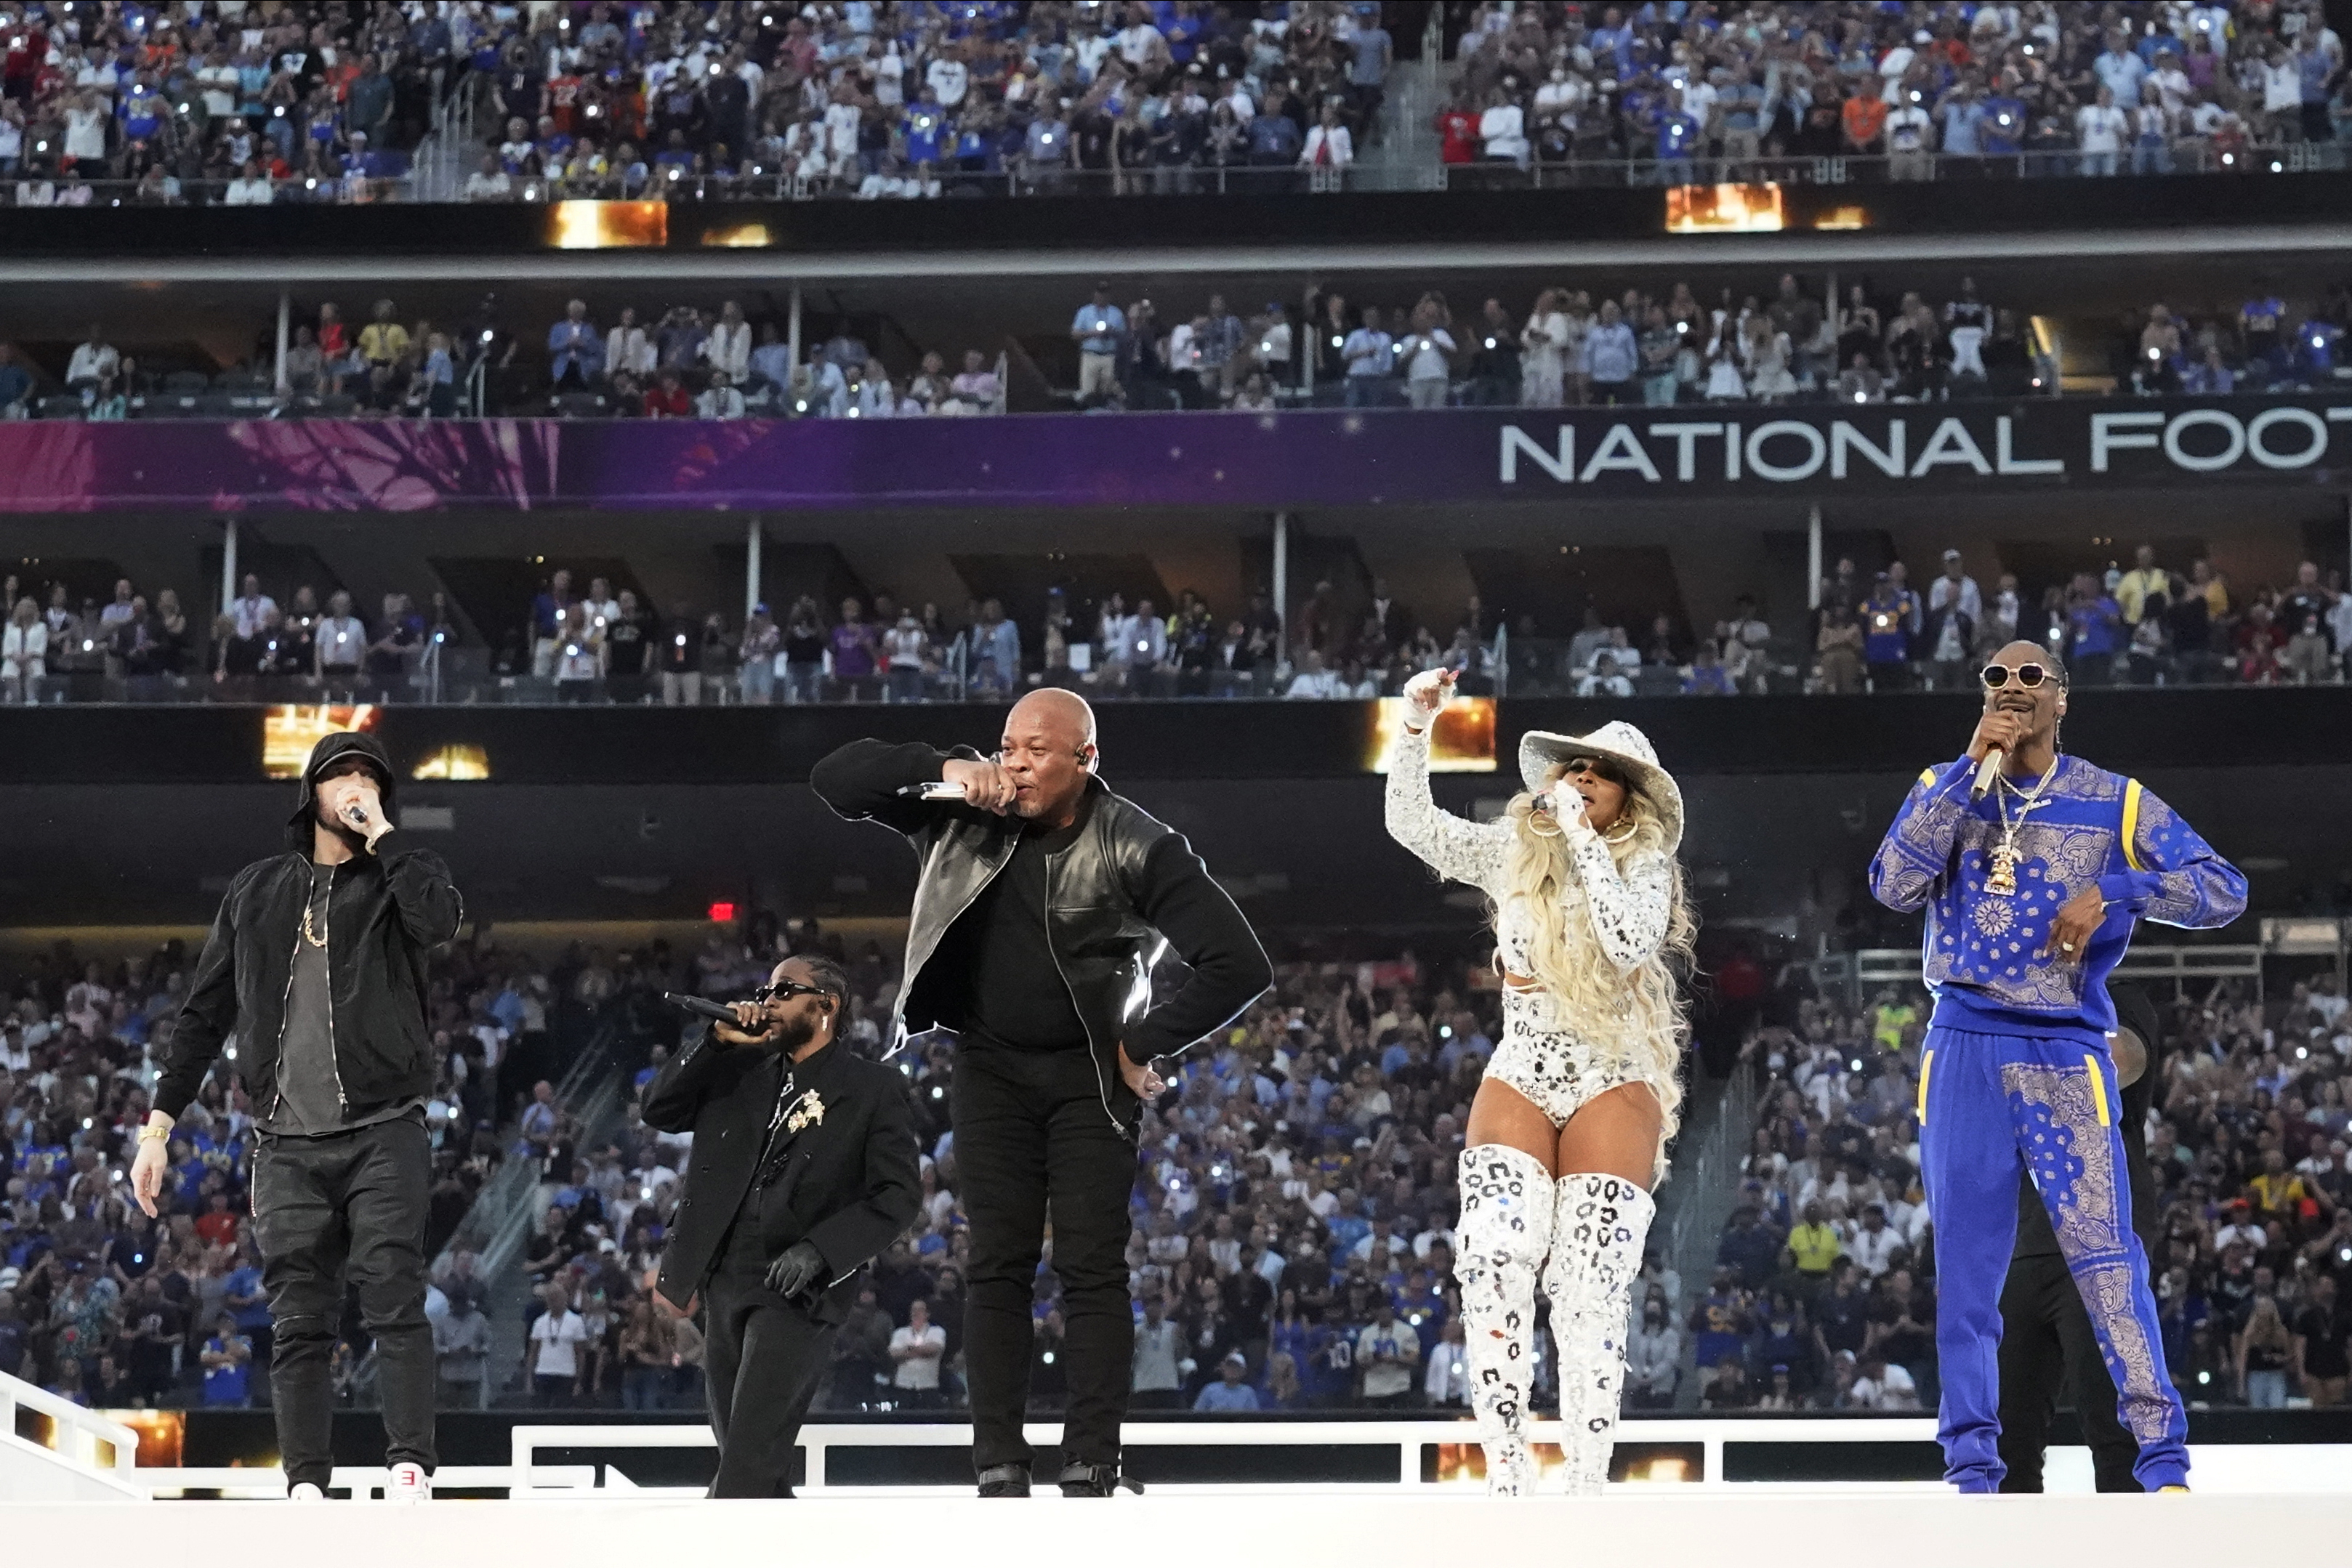 Super Bowl 2022 halftime show has Hollywood, fans 'officially